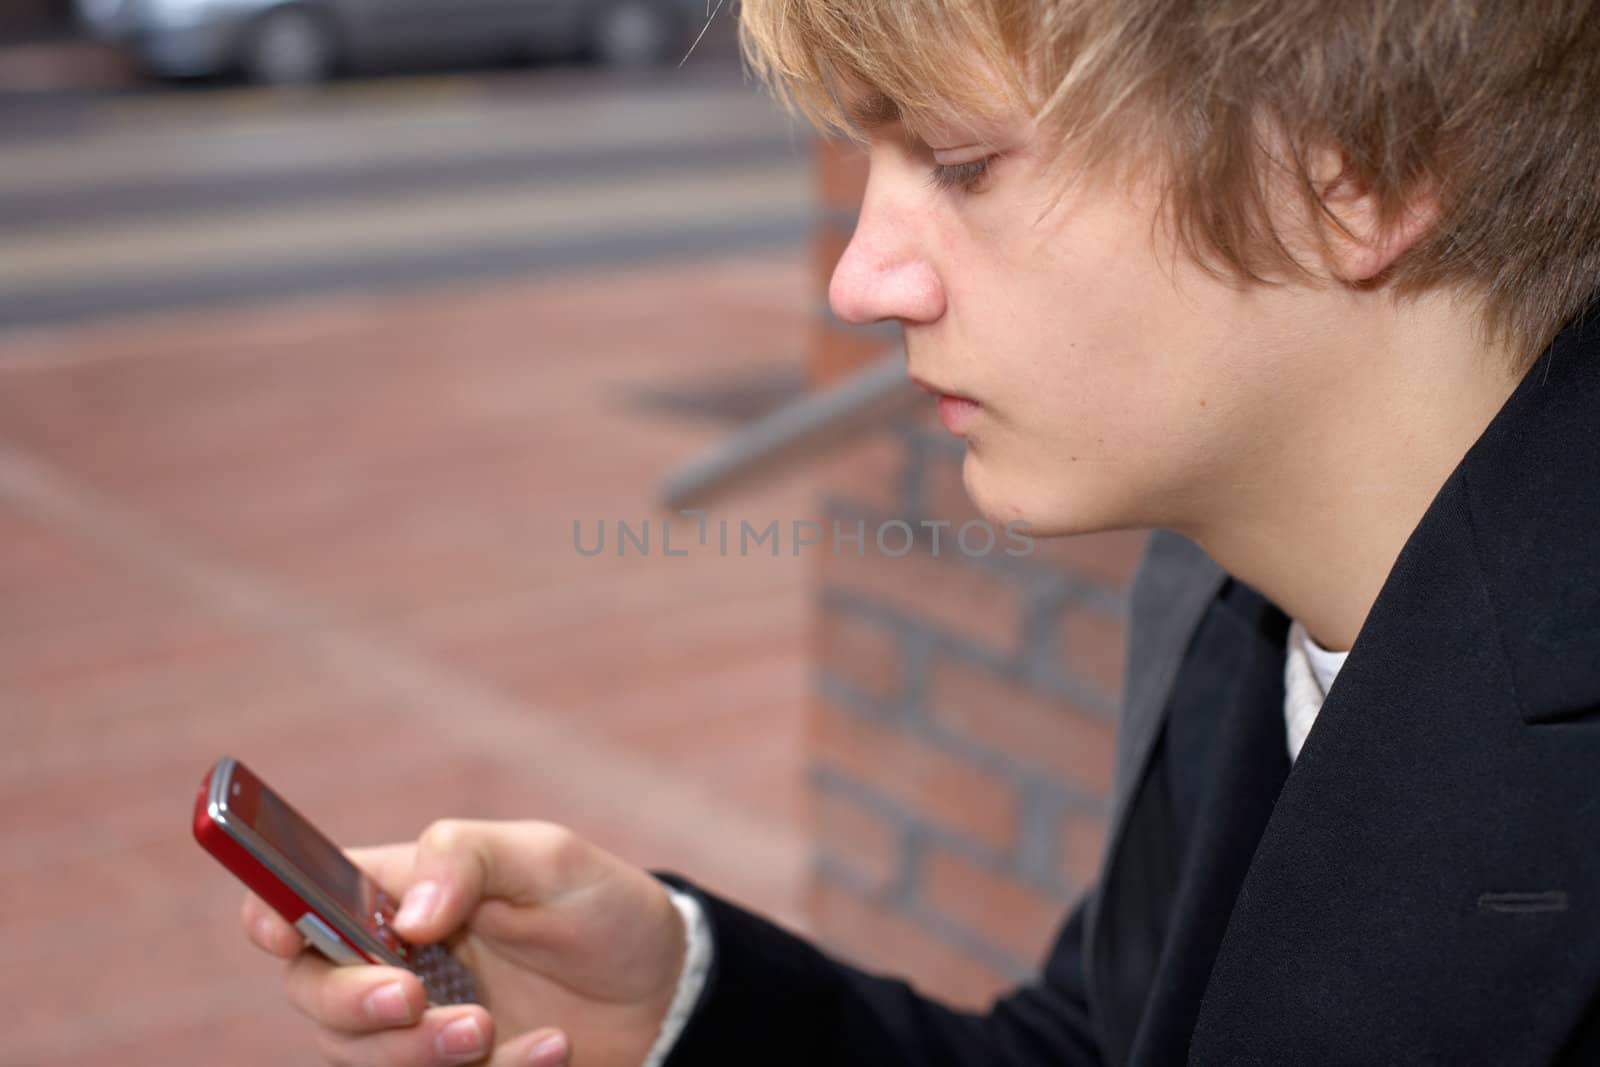 Teenage boy text messaging with mobile phone, close-up